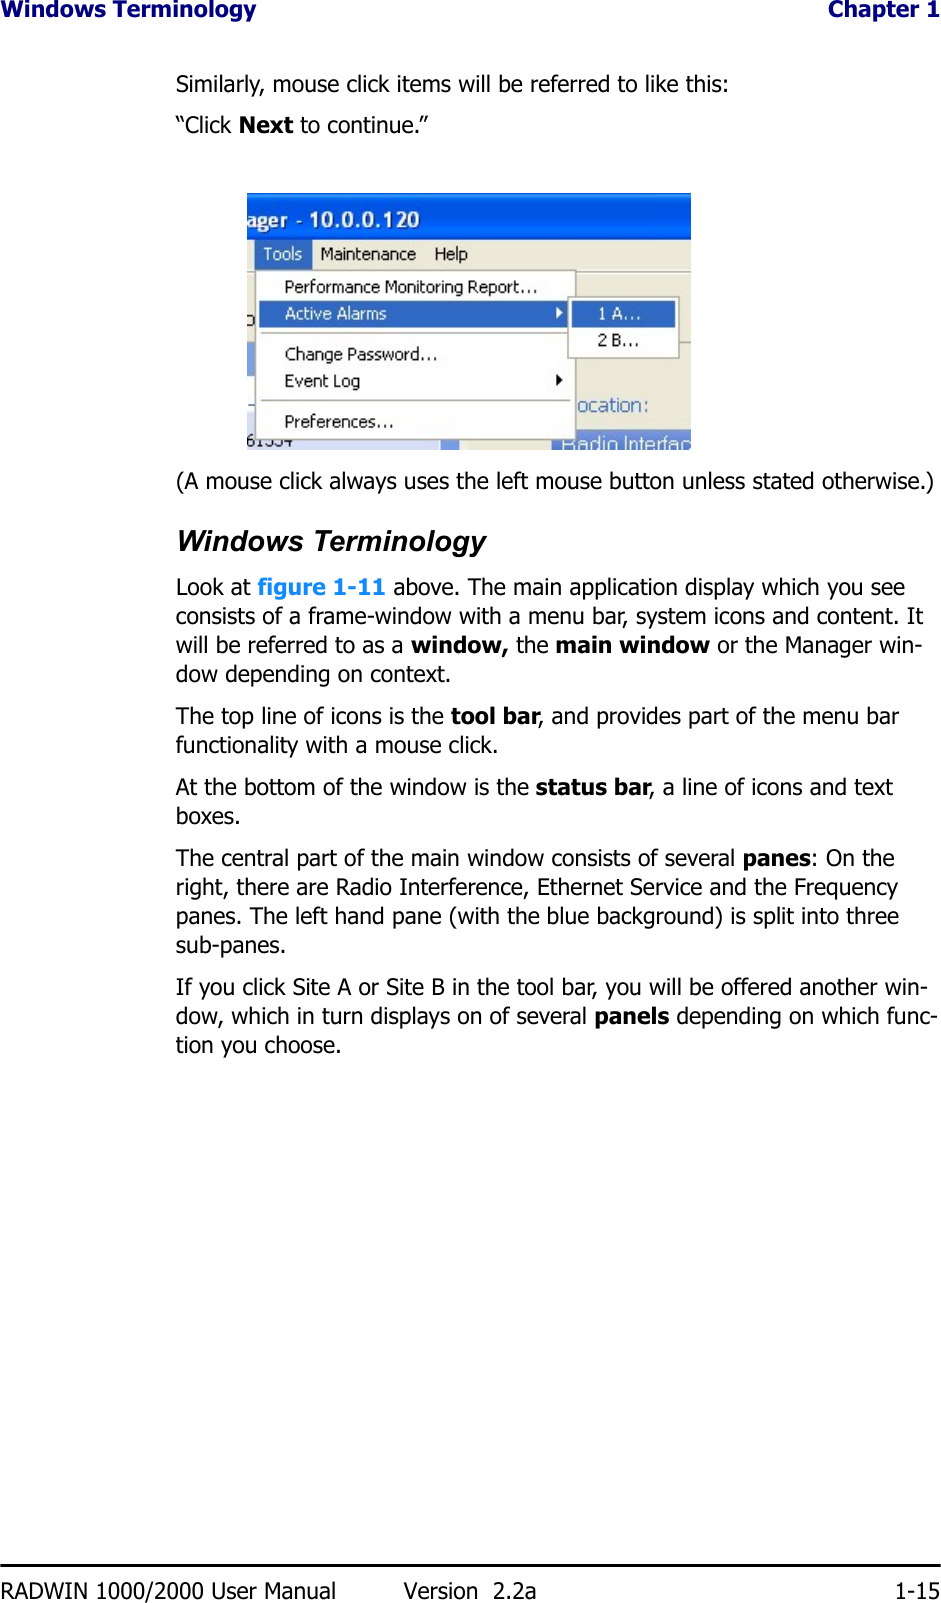 Windows Terminology  Chapter 1RADWIN 1000/2000 User Manual Version  2.2a 1-15Similarly, mouse click items will be referred to like this:“Click Next to continue.”(A mouse click always uses the left mouse button unless stated otherwise.)Windows TerminologyLook at figure 1-11 above. The main application display which you see consists of a frame-window with a menu bar, system icons and content. It will be referred to as a window, the main window or the Manager win-dow depending on context.The top line of icons is the tool bar, and provides part of the menu bar functionality with a mouse click.At the bottom of the window is the status bar, a line of icons and text boxes.The central part of the main window consists of several panes: On the right, there are Radio Interference, Ethernet Service and the Frequency panes. The left hand pane (with the blue background) is split into three sub-panes.If you click Site A or Site B in the tool bar, you will be offered another win-dow, which in turn displays on of several panels depending on which func-tion you choose.